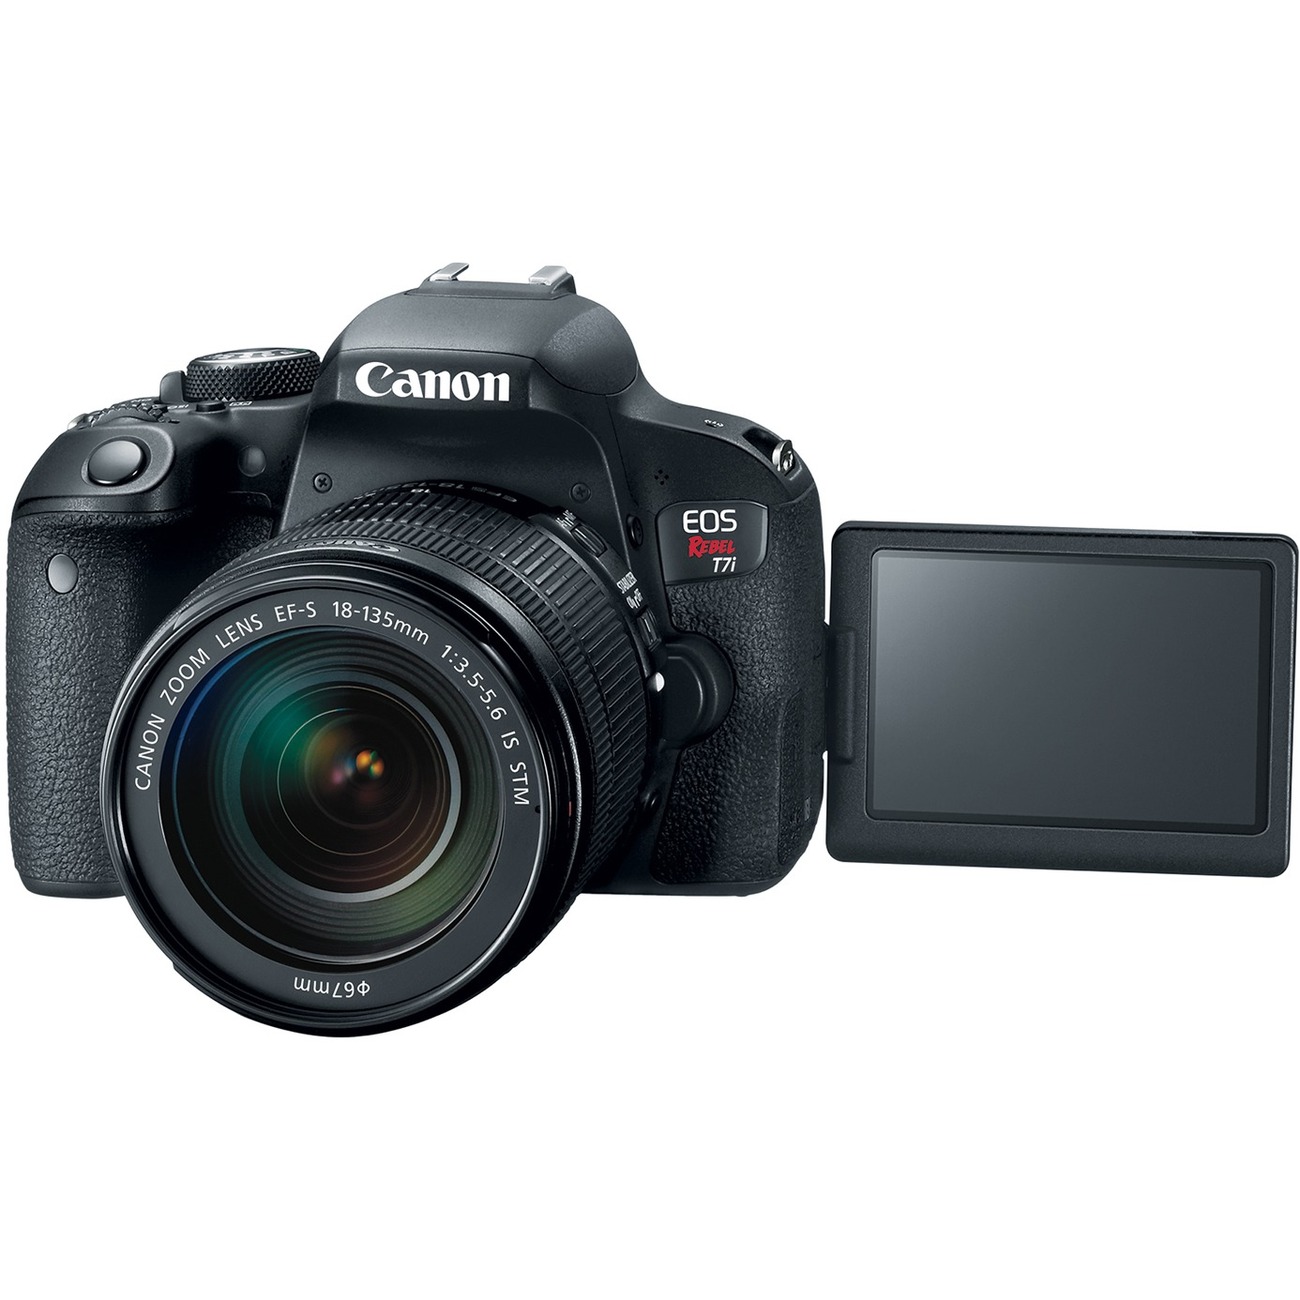 Canon EOS Rebel T7i DSLR Camera with 18-135mm Lens - image 3 of 7